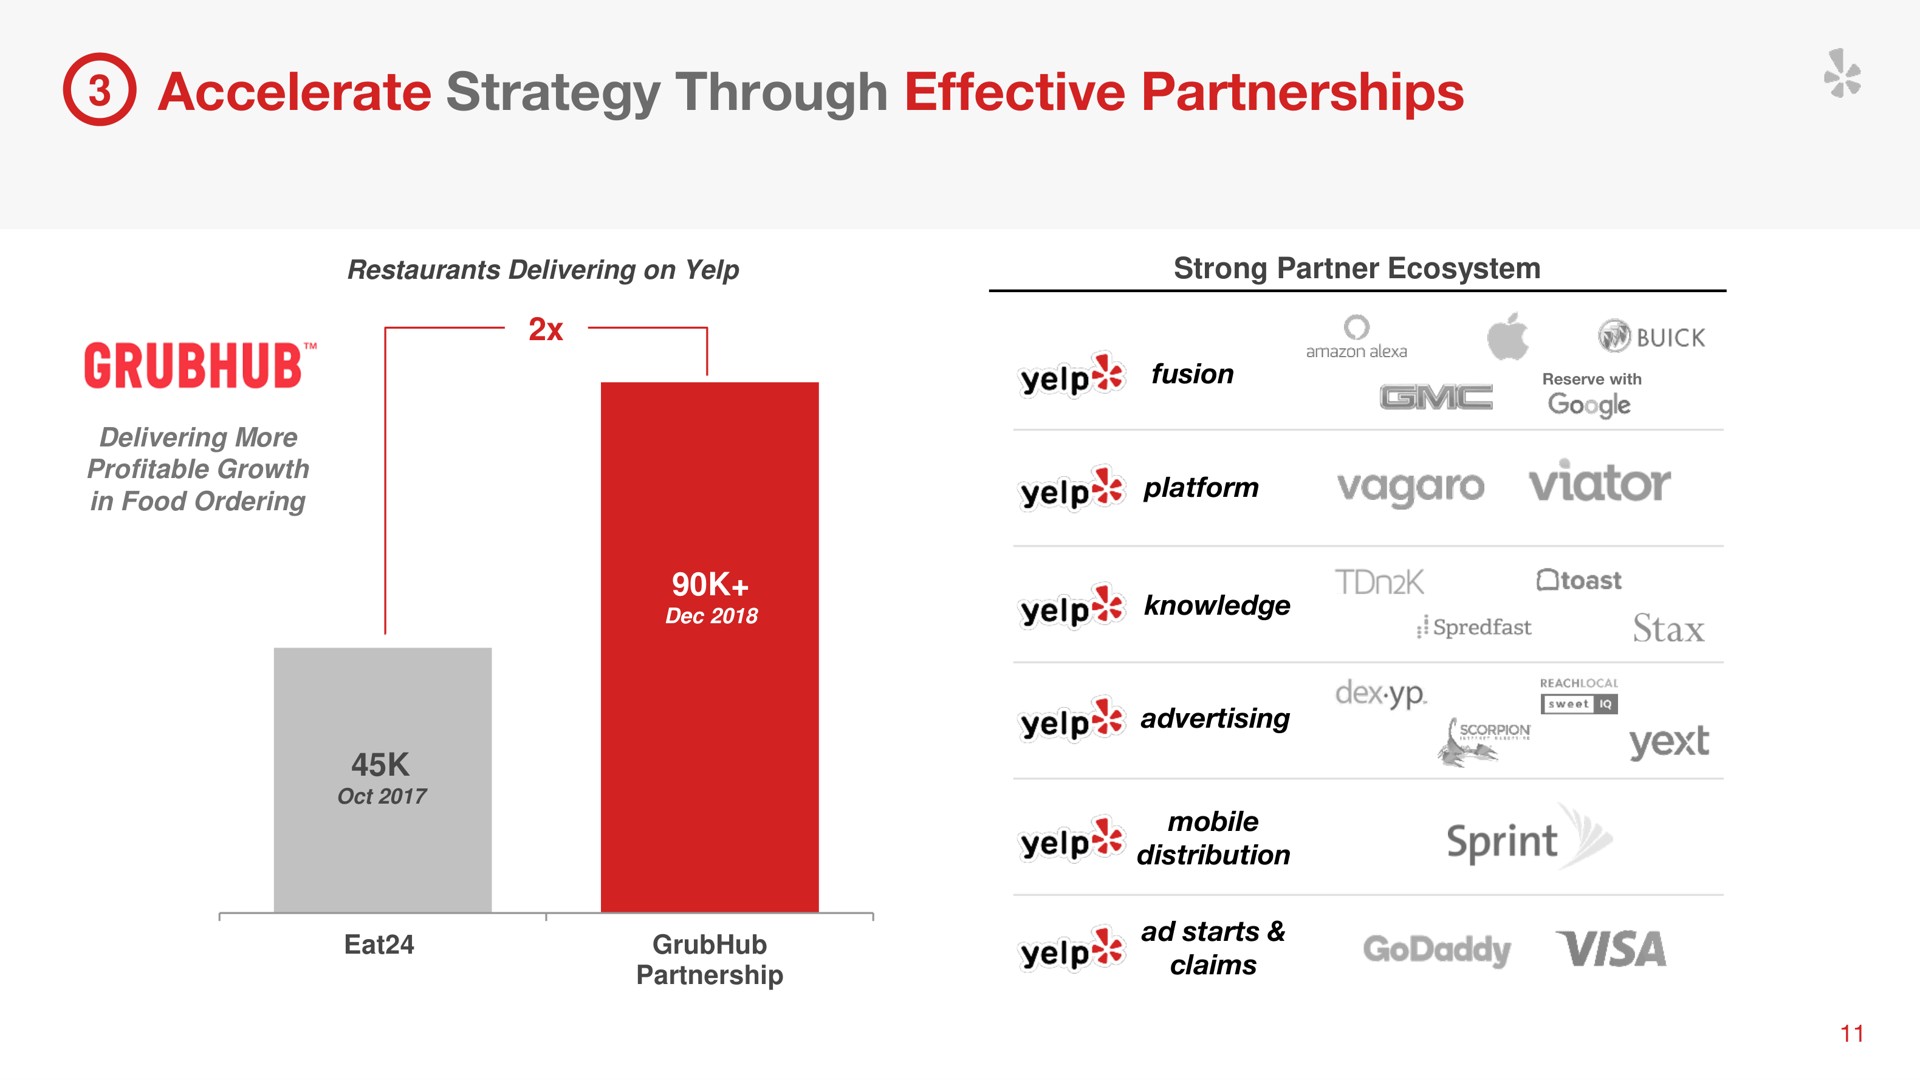 accelerate strategy through effective partnerships | Yelp